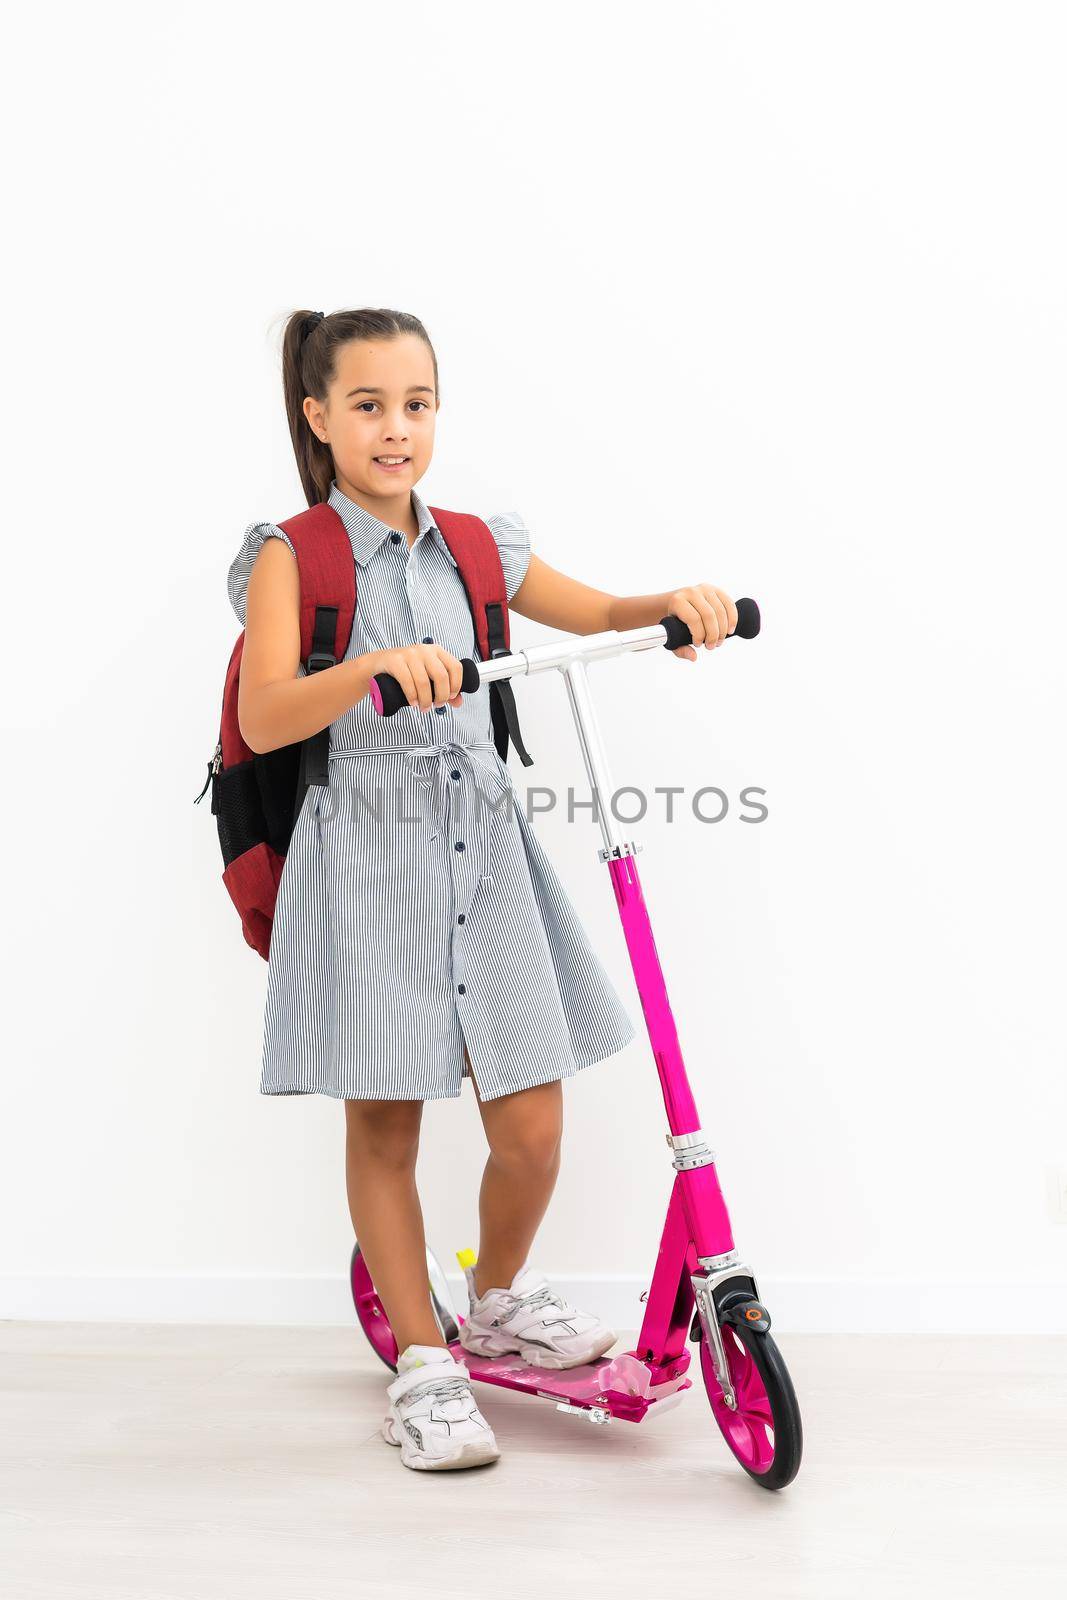 Full length profile shot of a schoolgirl with a backpack riding a scooter isolated on white background.